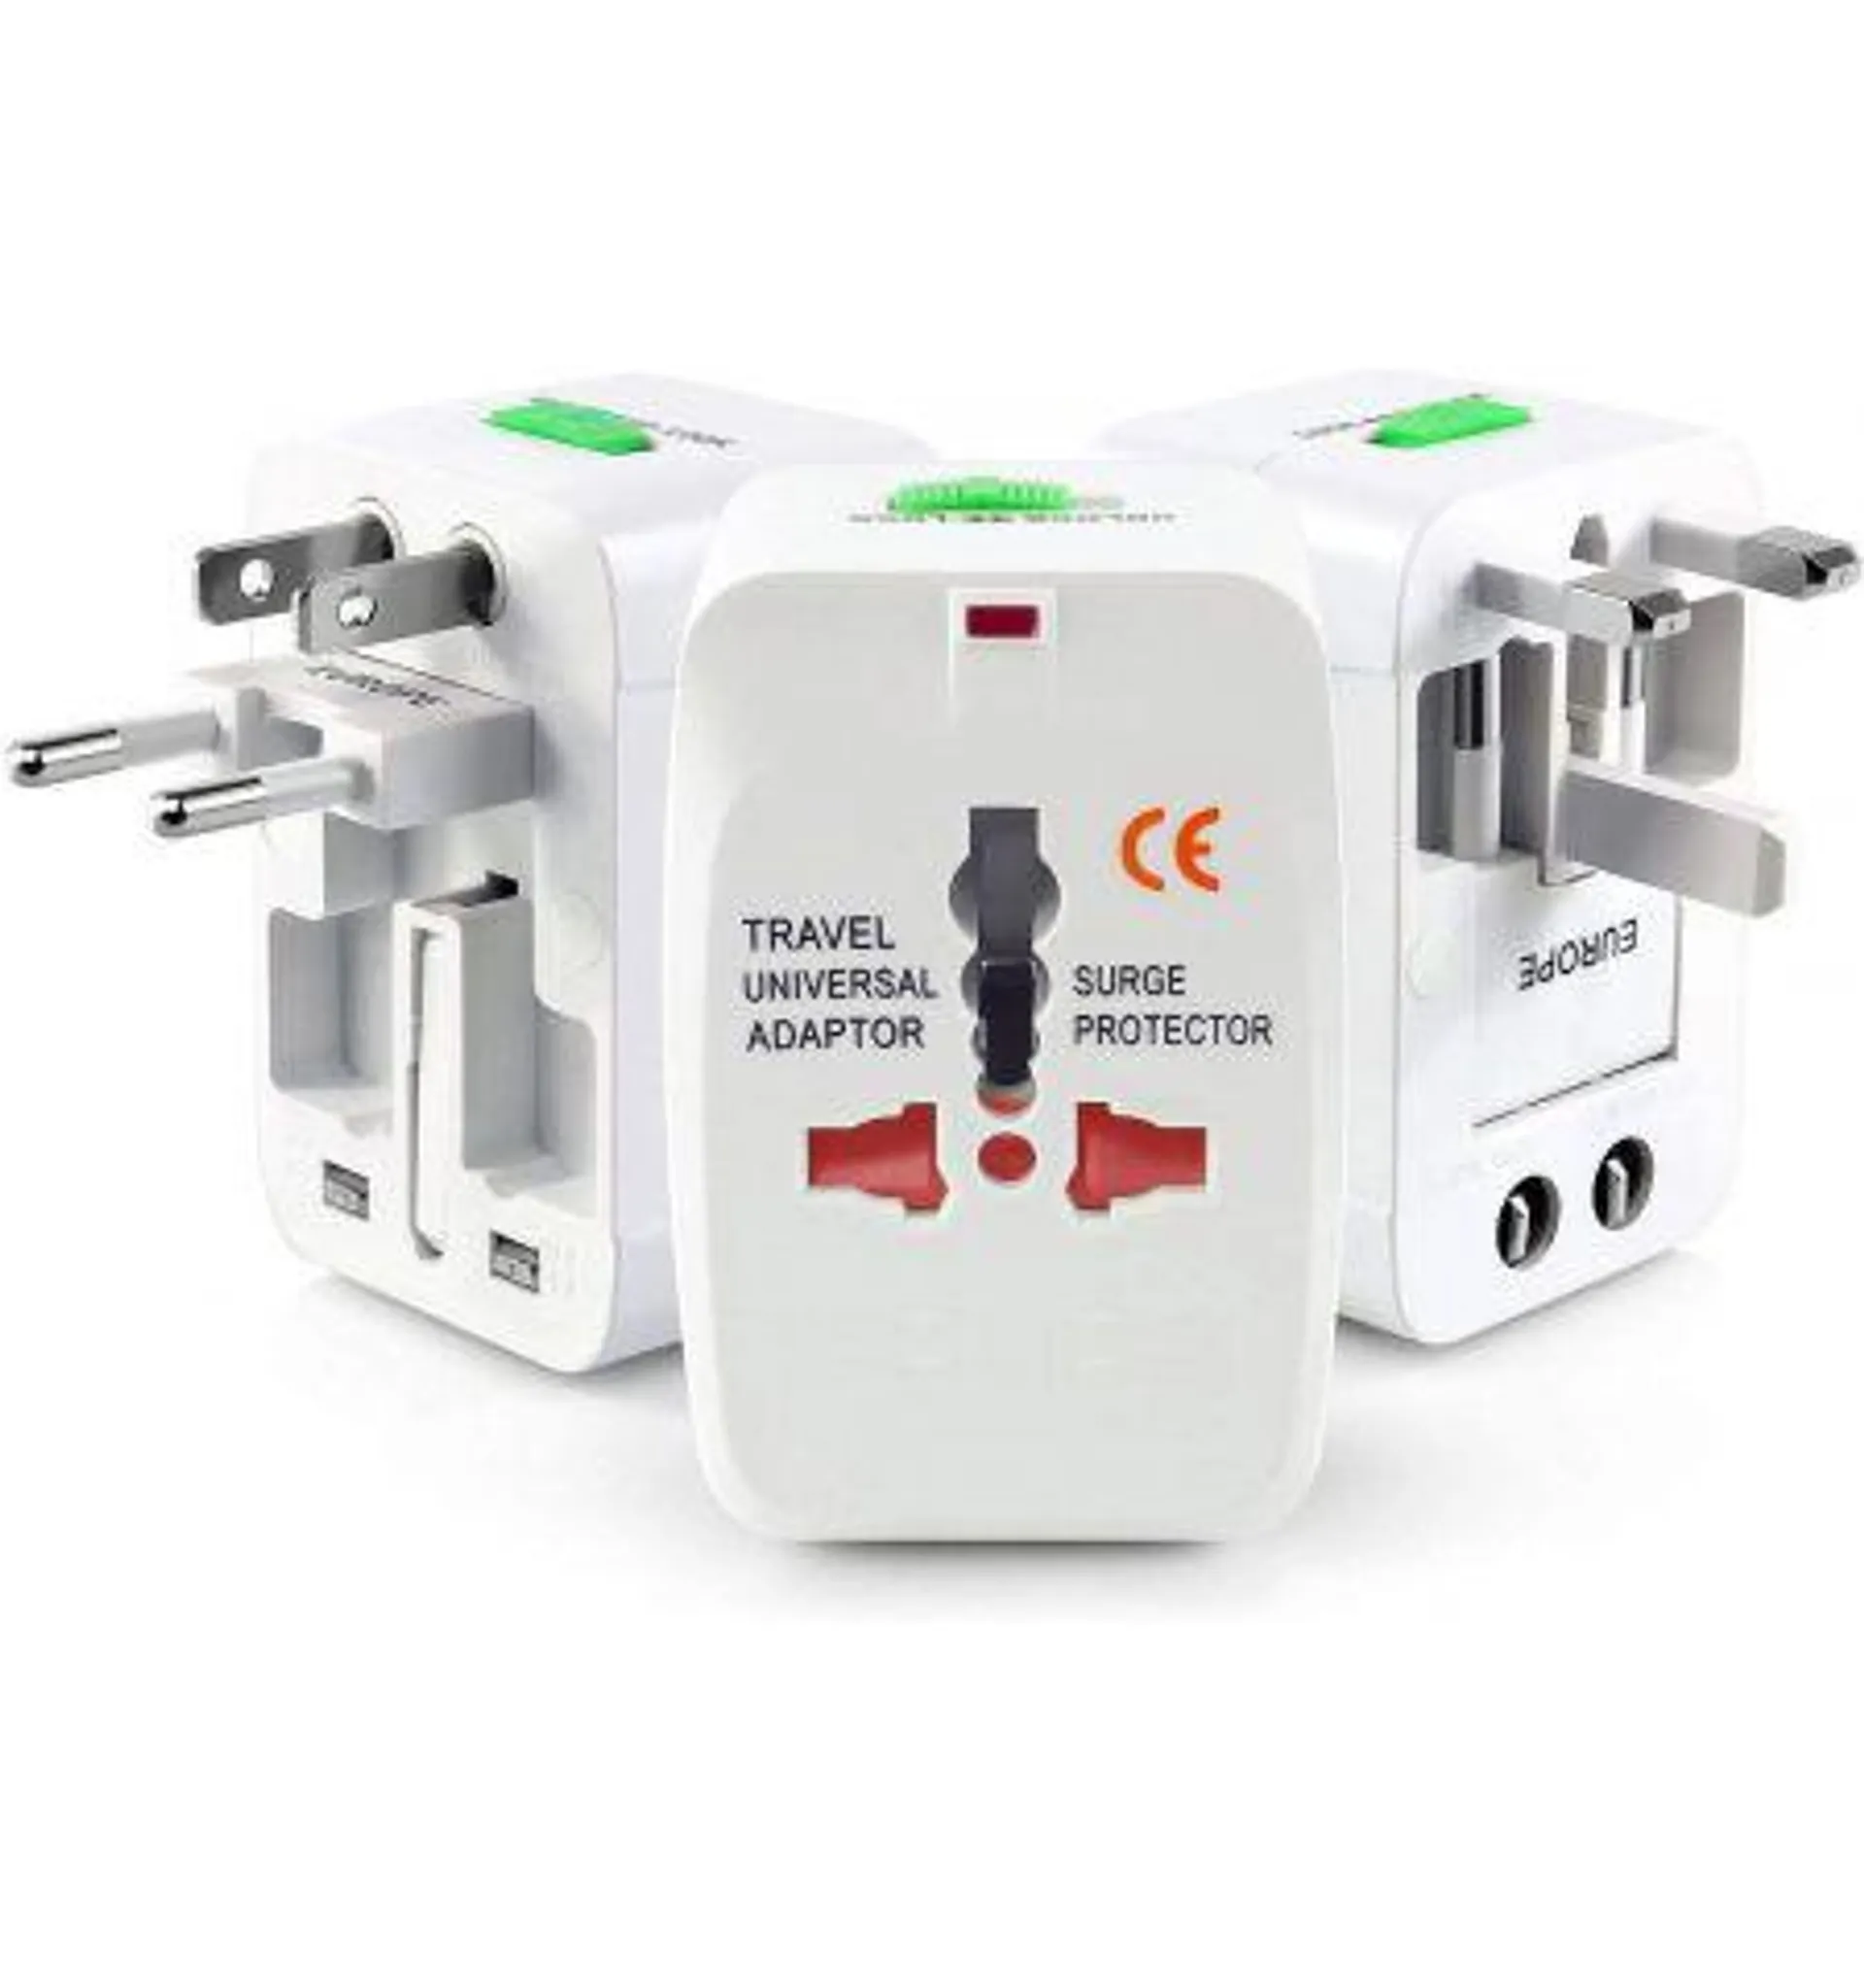 All-In-One Universal Travel Adapter